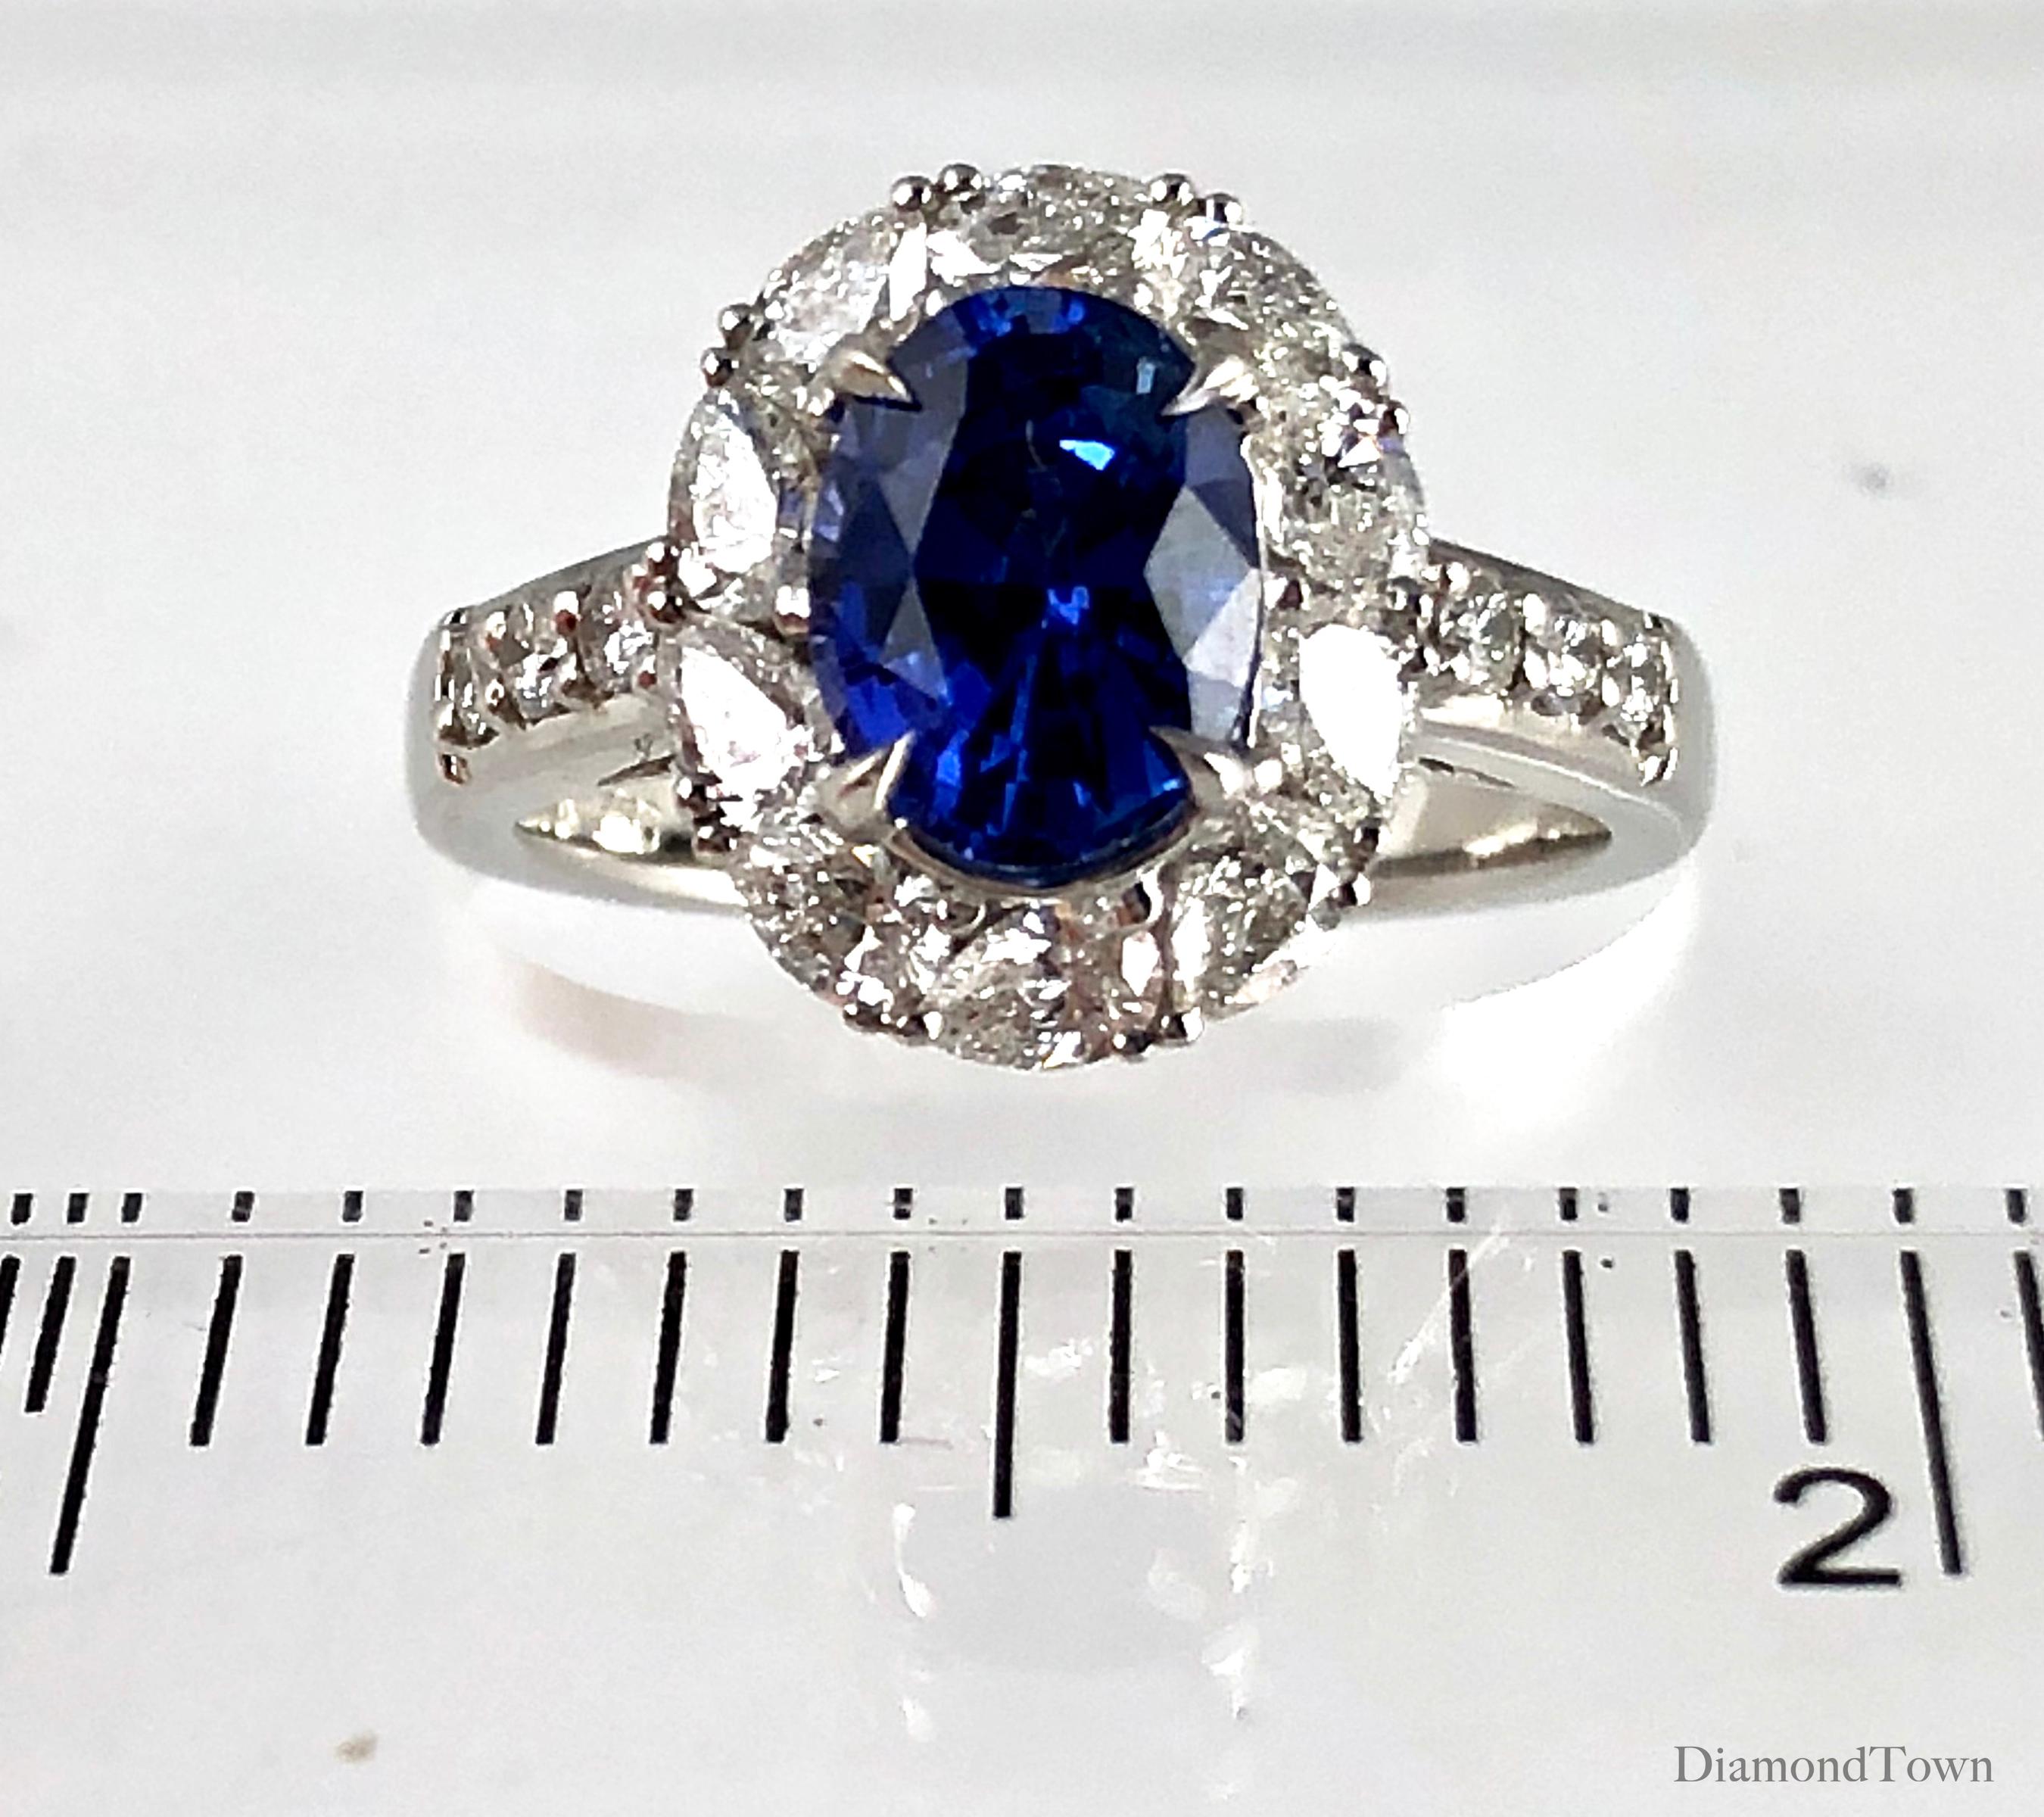 (DiamondTown) This handcrafted ring features a 1.84 carat Oval Cut Ceylon Sapphire center, surrounded by a halo of pear shaped diamonds. Additional round diamonds trail down the side shank, bringing the total diamond weight to 0.96 carats.

Ring